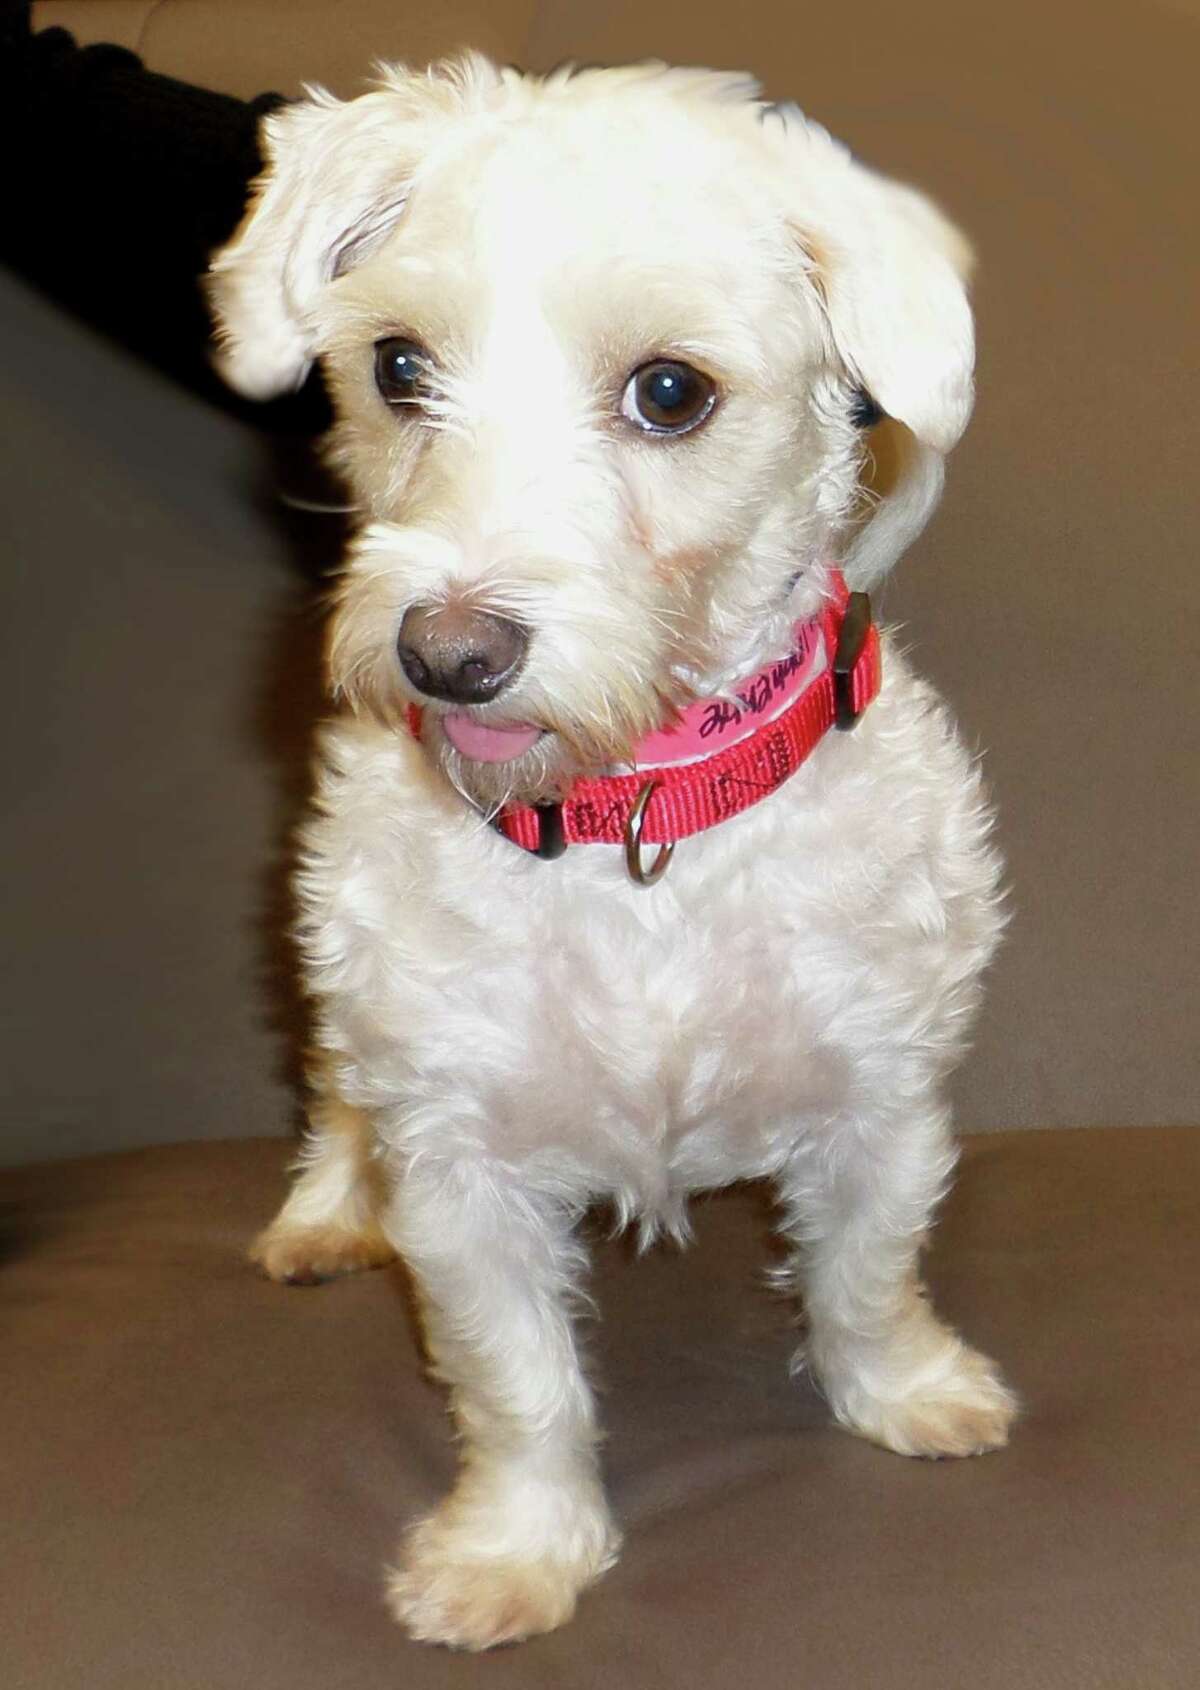 Coco will be available for adoption at 11 a.m. Friday at Citizens for Animal Protection, 17555 I-10 W. More information: cap4pets.org or 281-497-0591.